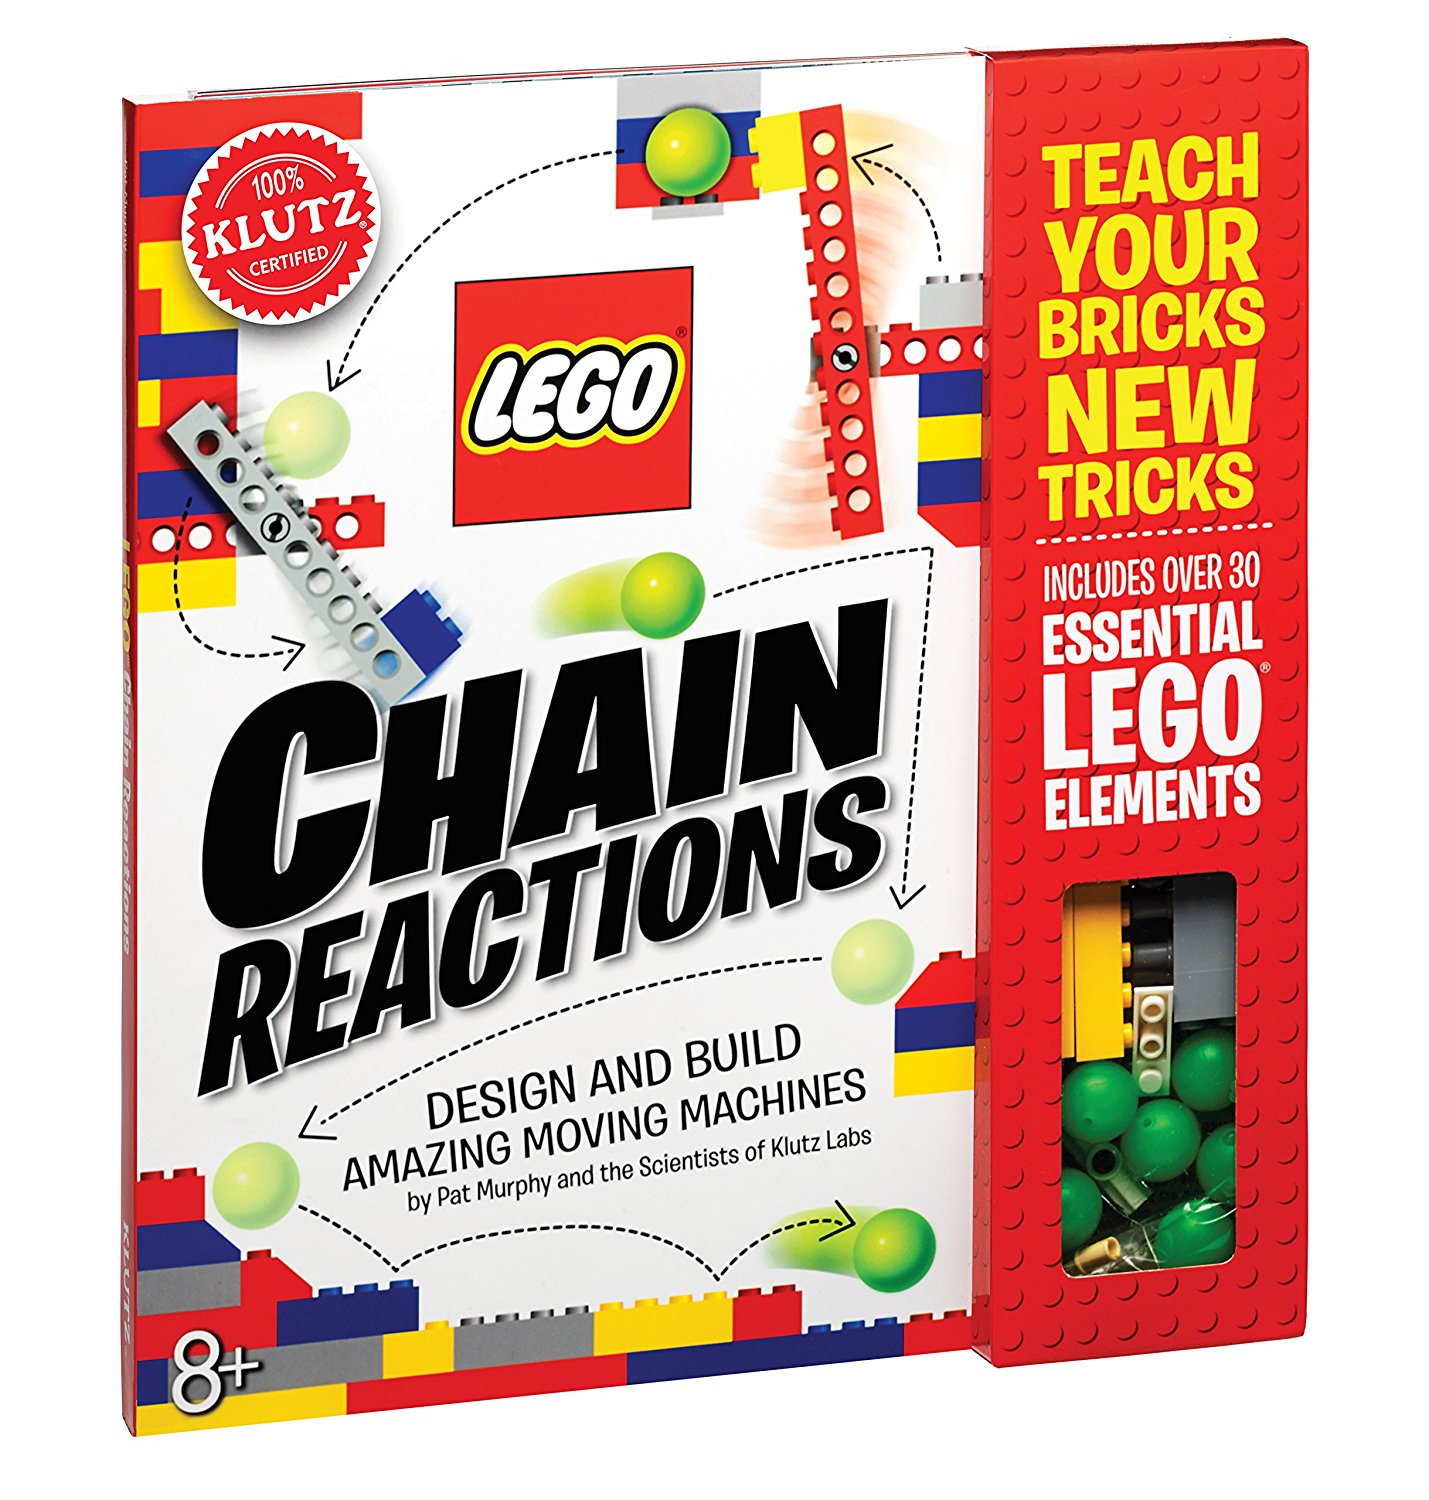 Lego Chain Reactions Kit